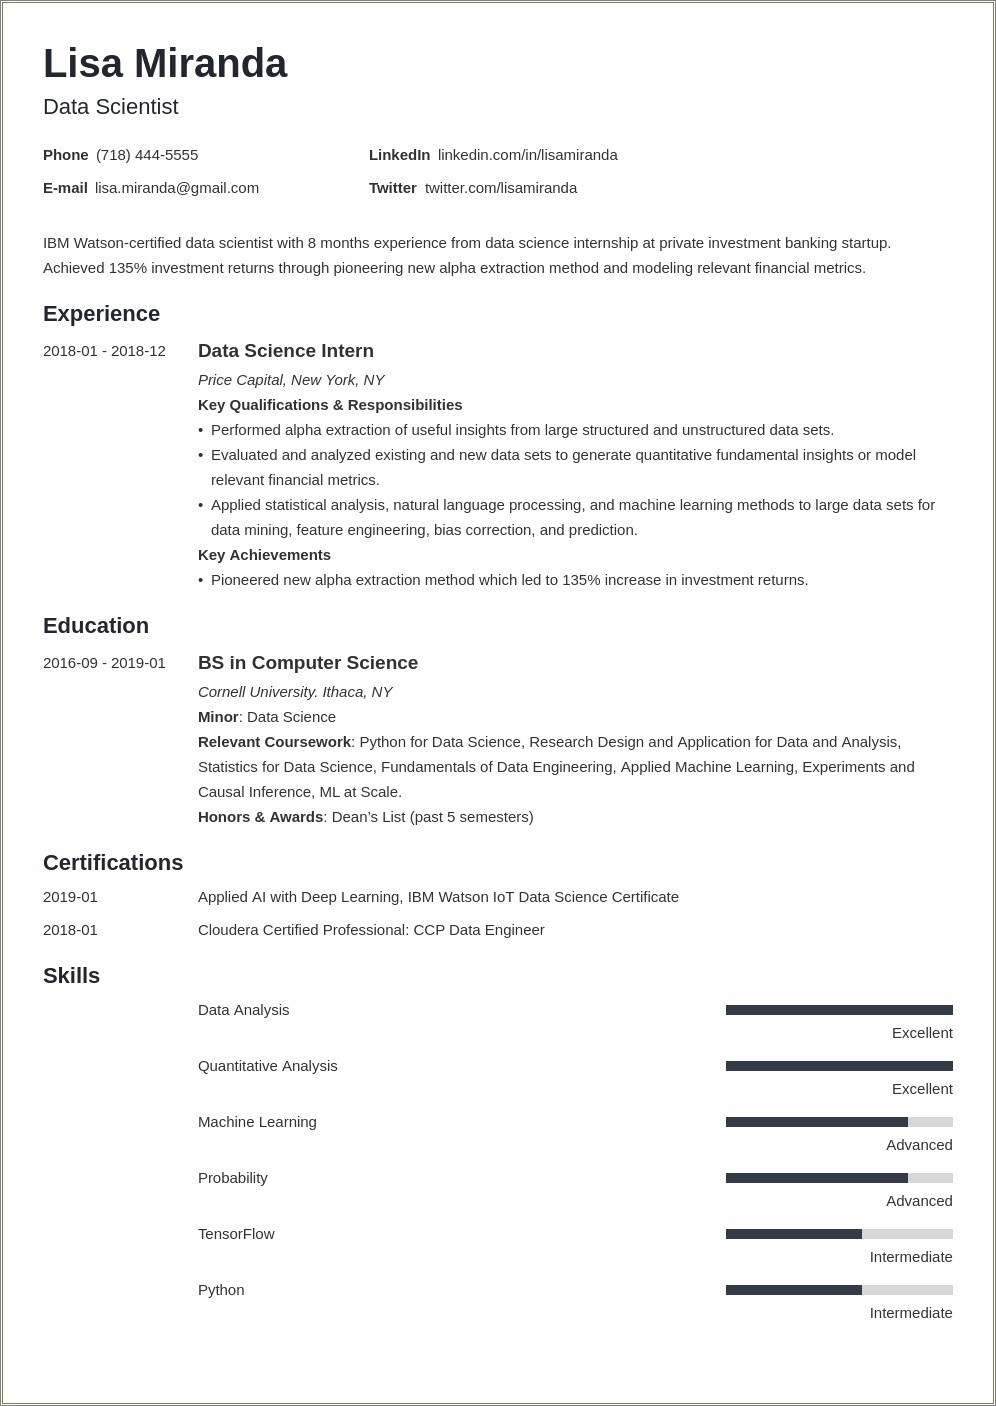 Sample Objectives For College Student Resumes